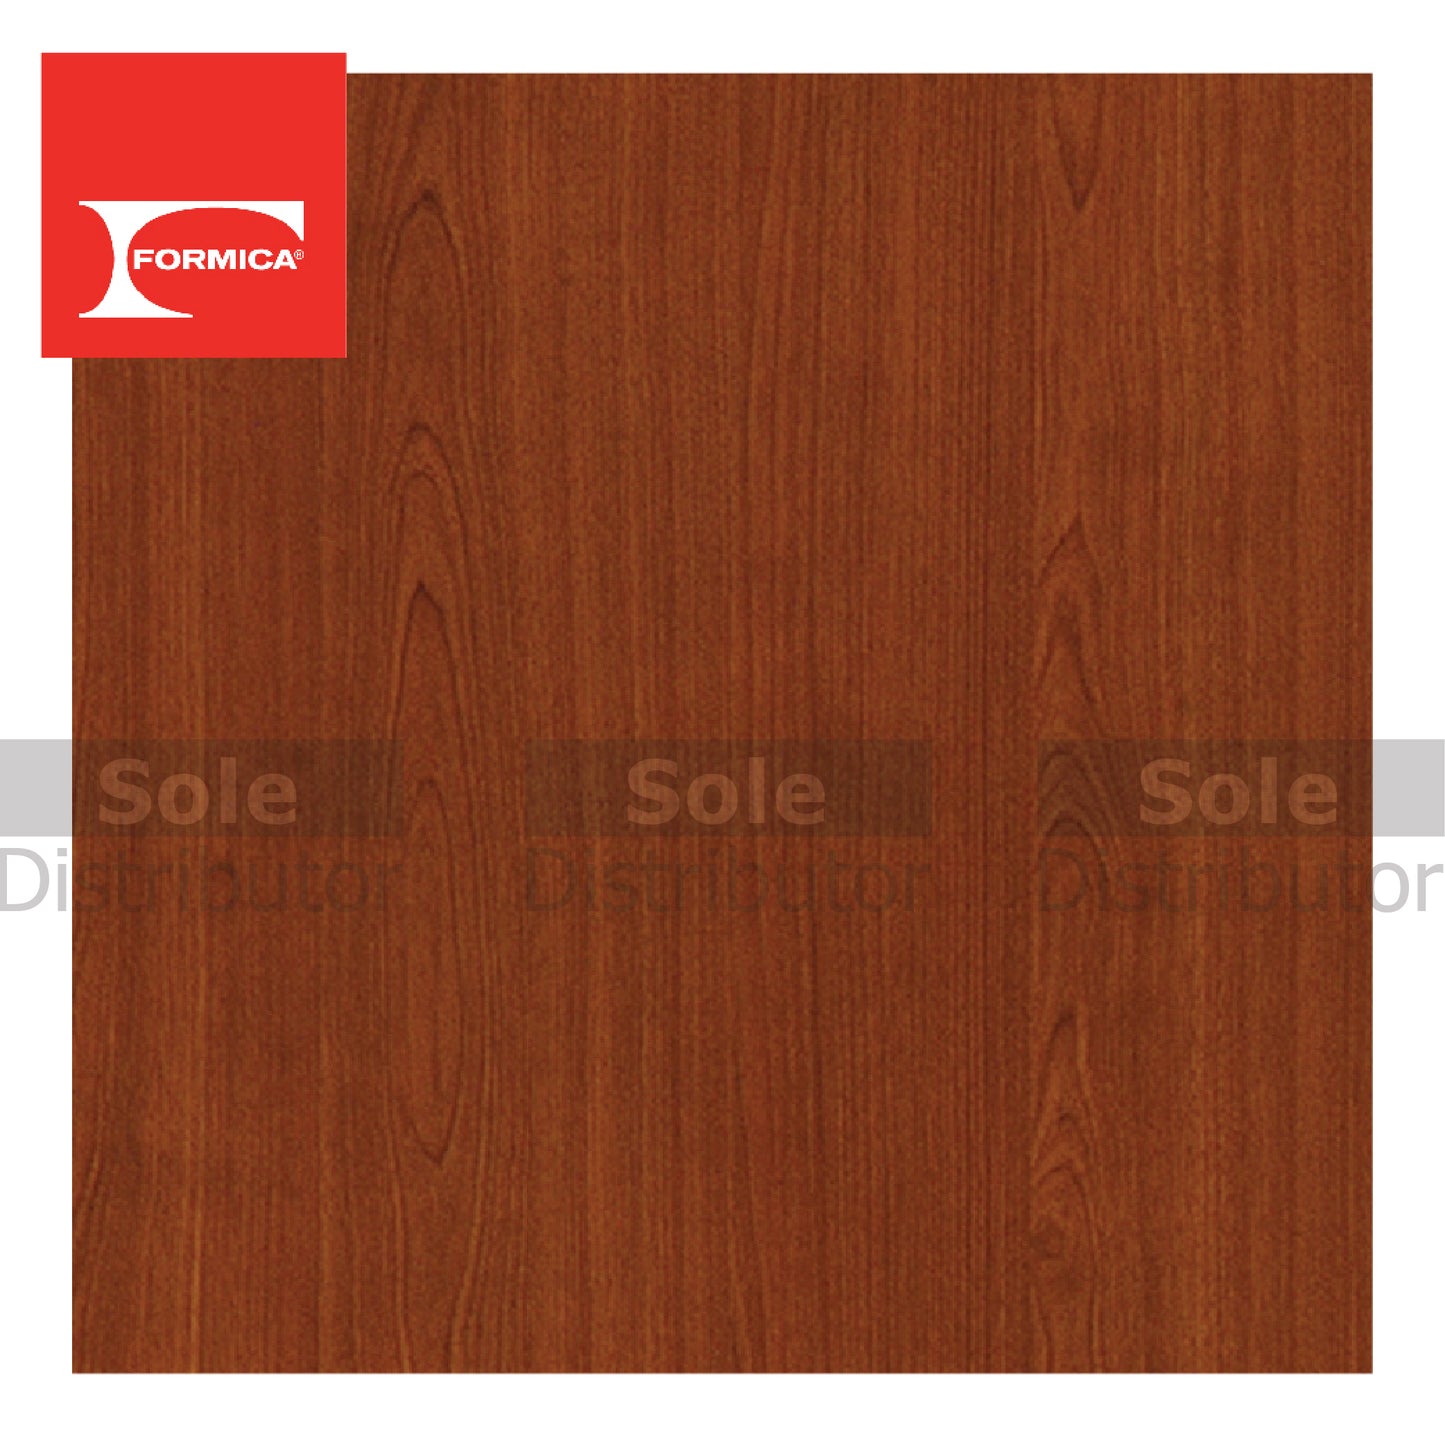 Formica Wild Cherry General Purpose Laminate Sheet, 1220mm x 2440mm 1mm Thickness Matte™ Finish - PP5904IM